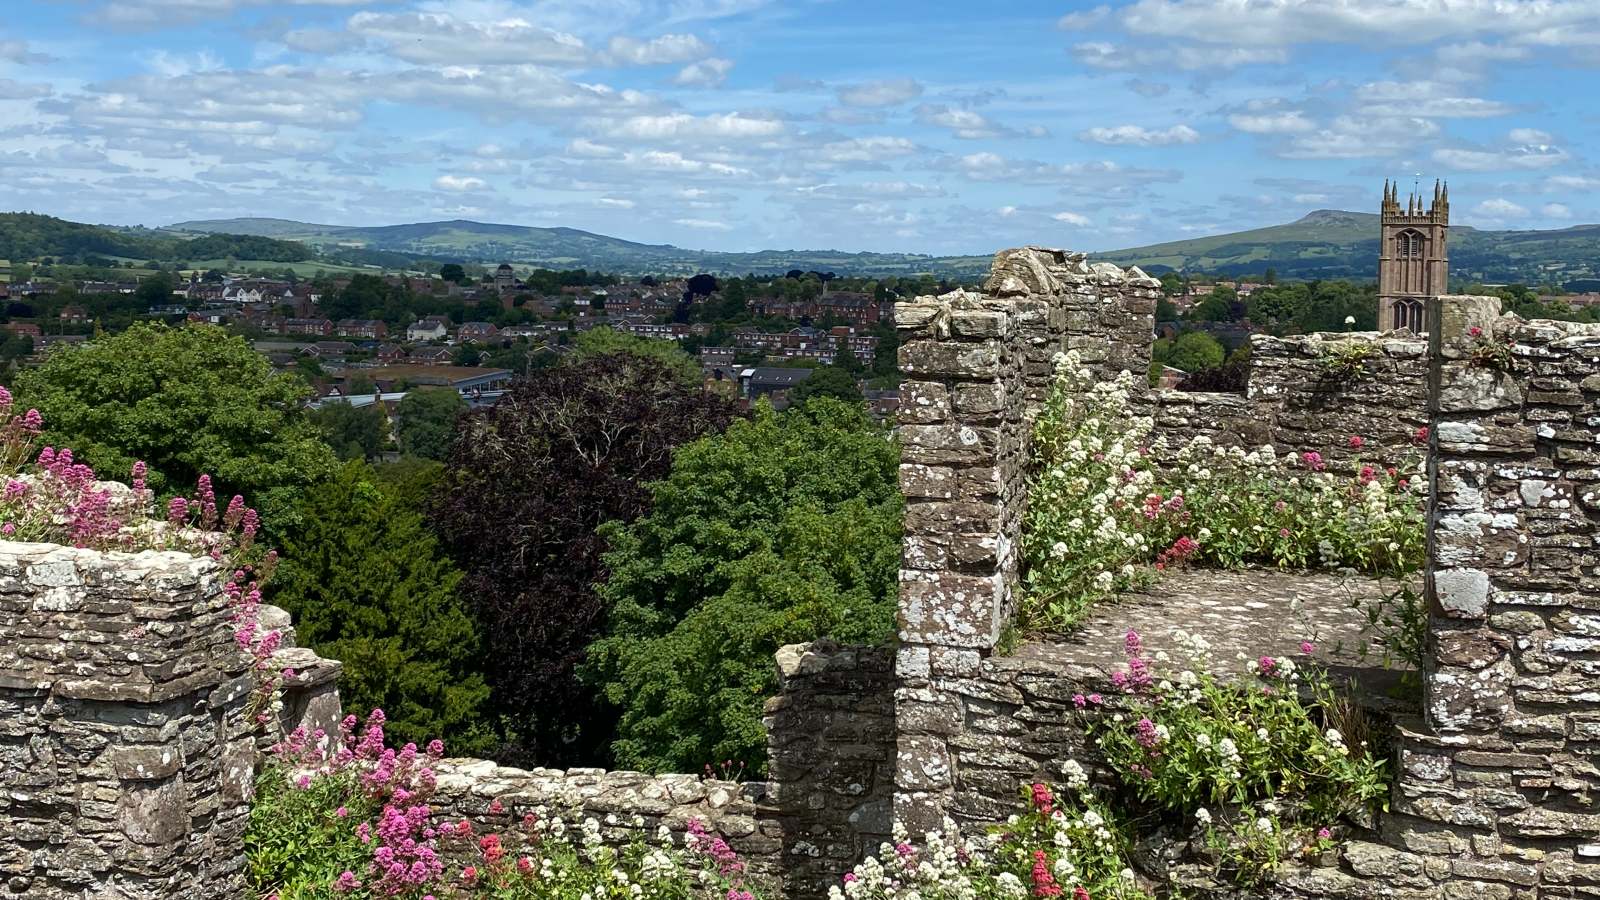 The grounds of Ludlow Castle